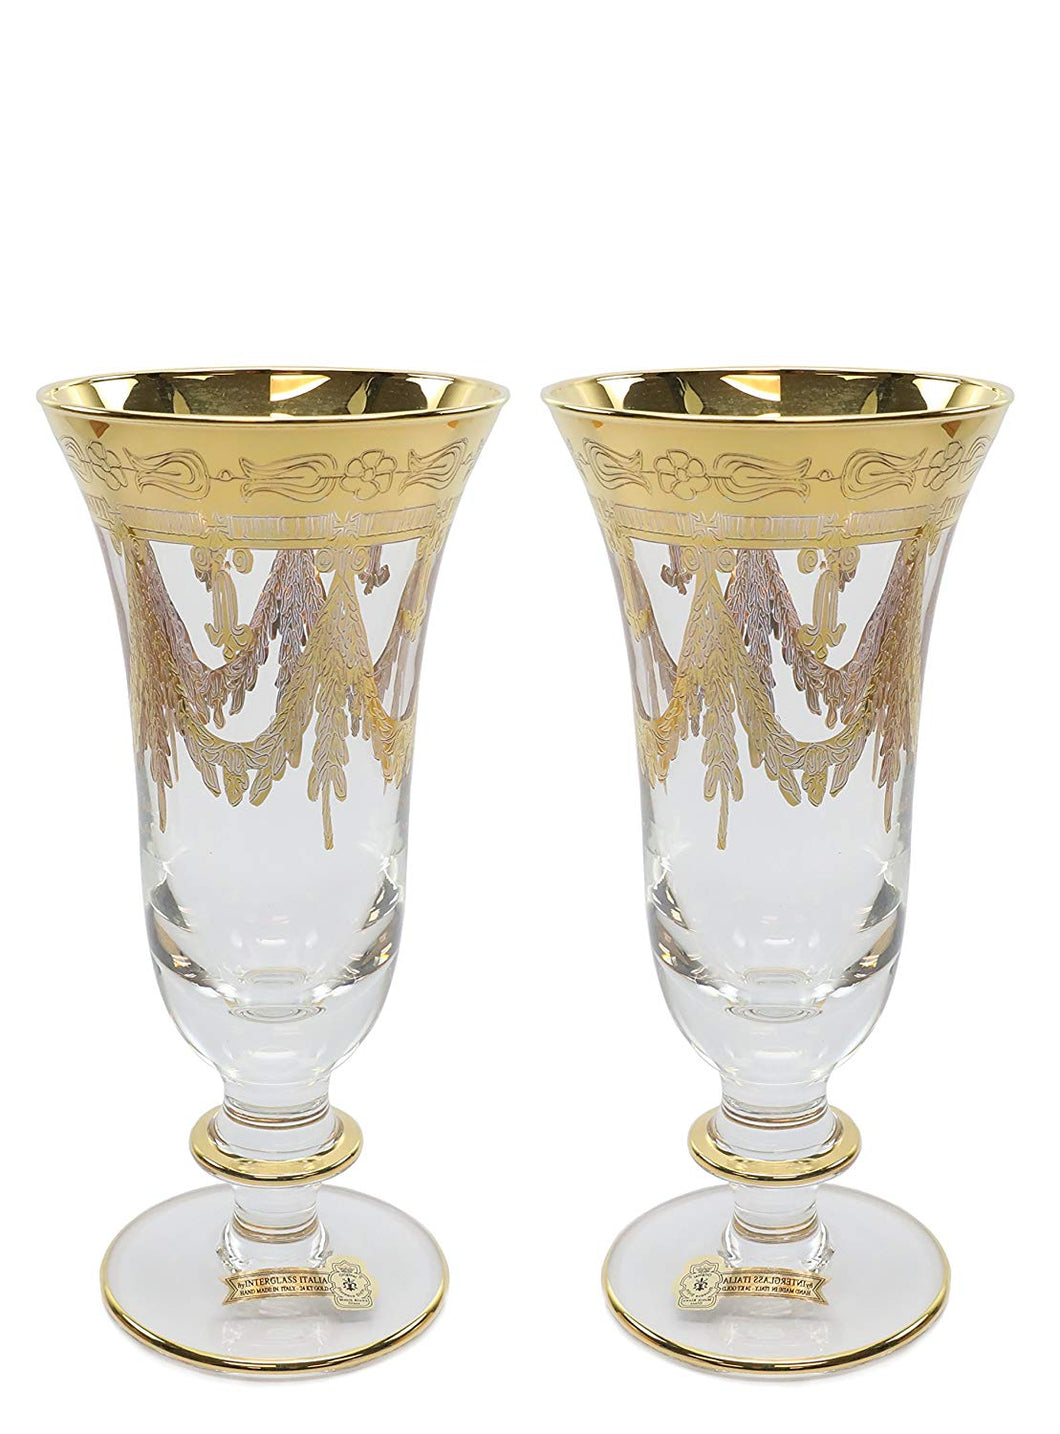 Interglass Italy Clear Champagne Crystal Glasses, Vintage Design Set of 2, 6 or 12